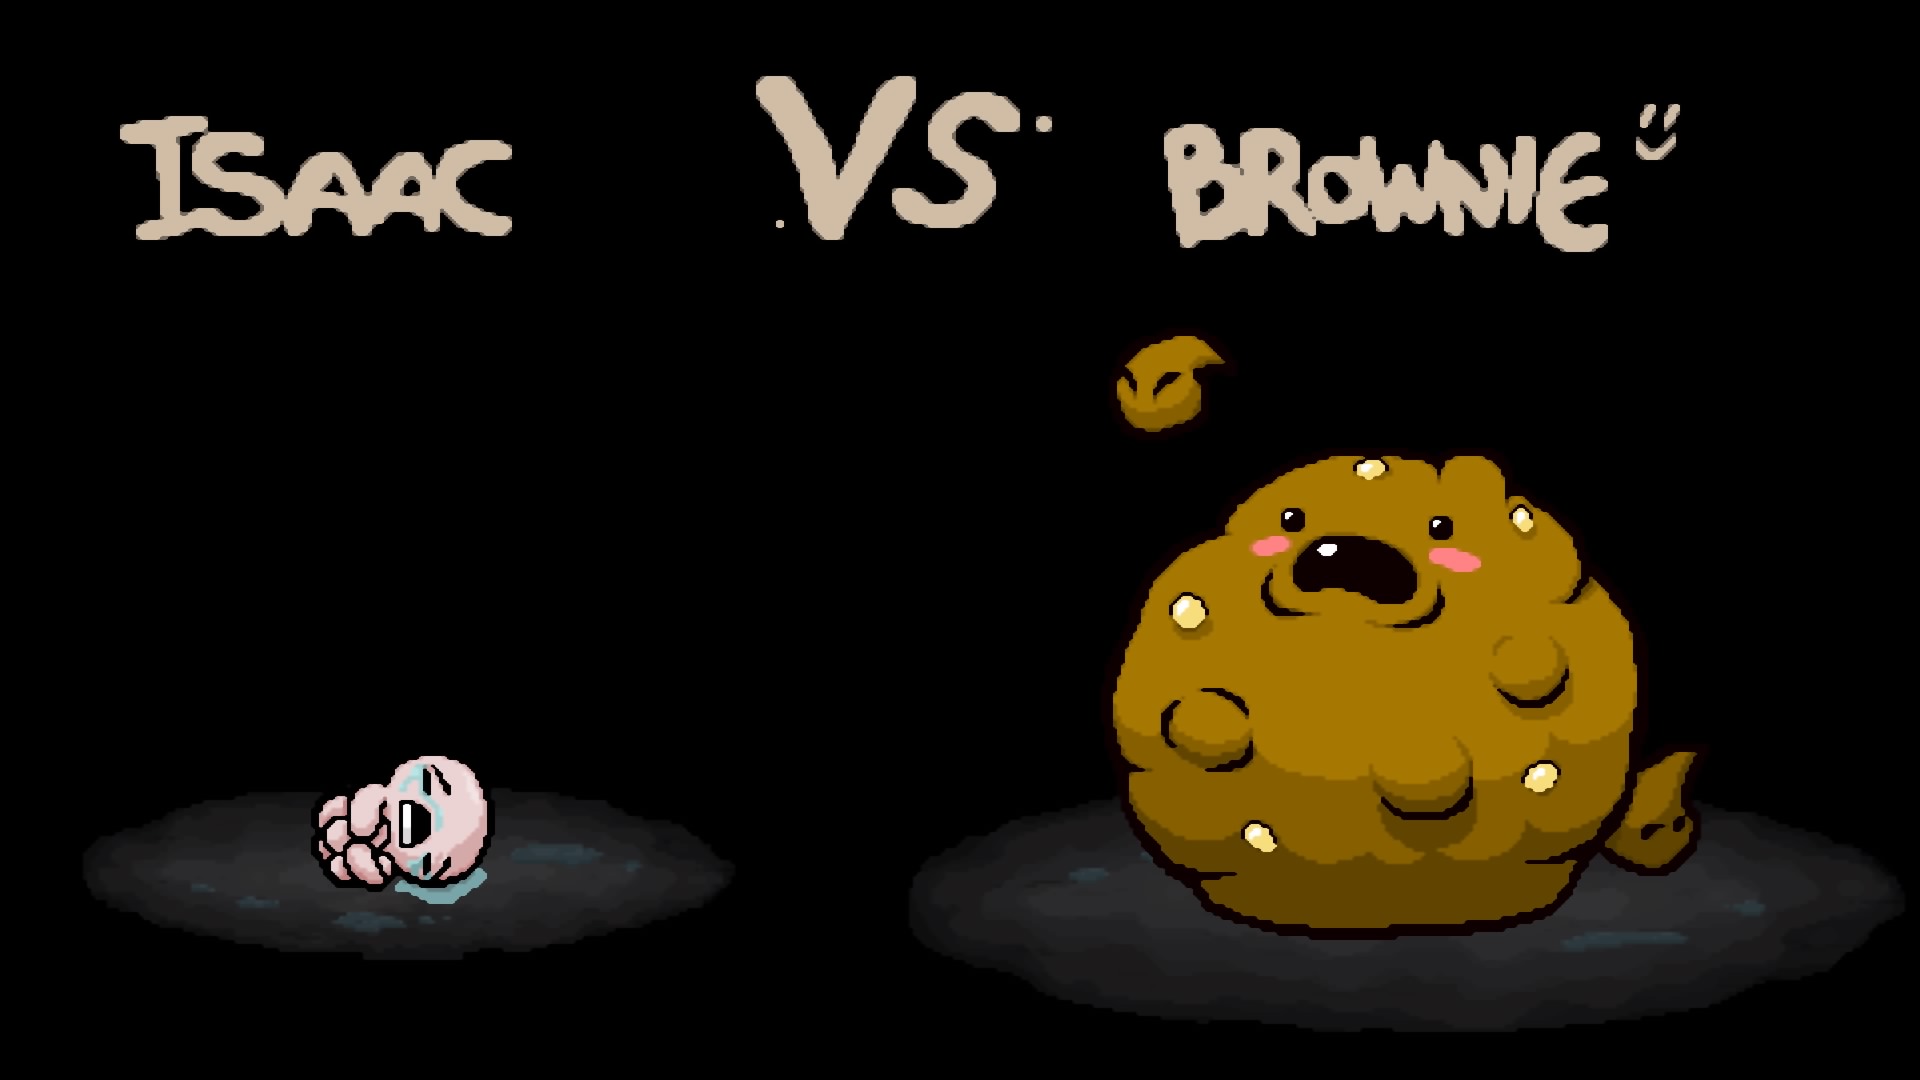 the binding of isaac afterbirth console commands